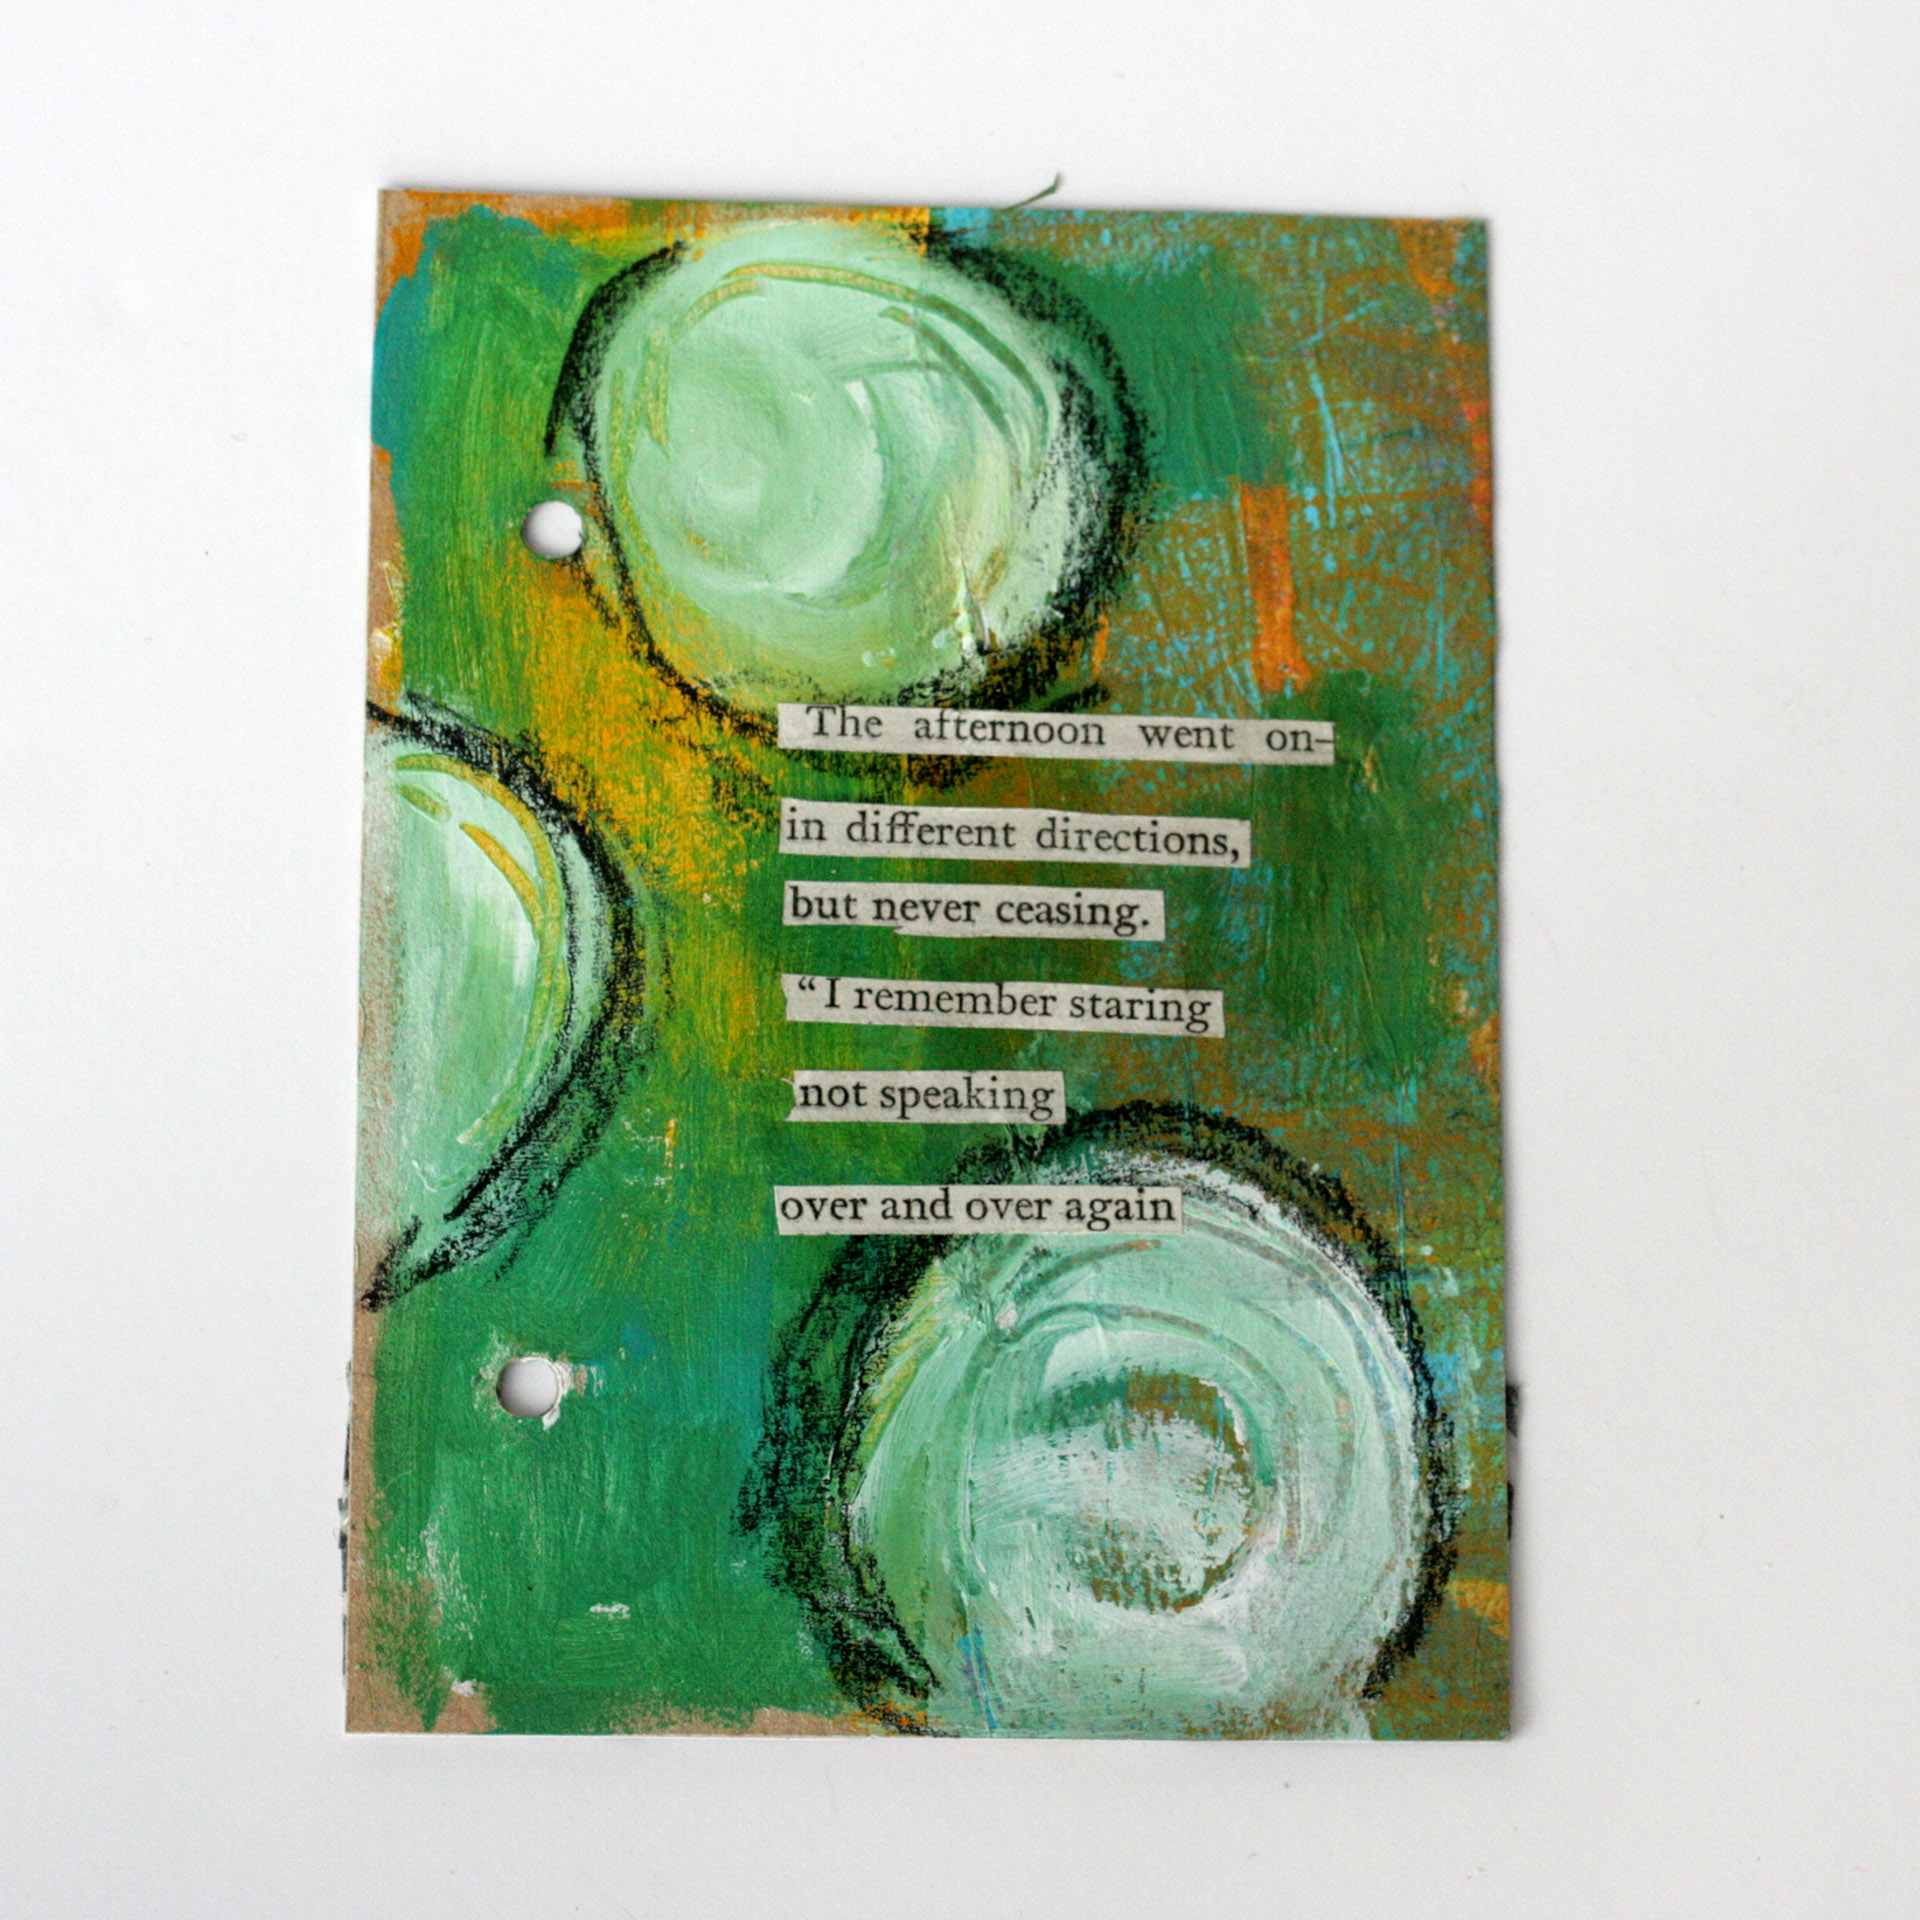  100 Days of Found Poems - Using found words from the novel "Cranford" I'm creating 100 mixed media art works using found ephmera and scraps I have in my stash. Follow along with @kgaunt #mixedmedia #artjournal #found poem #foundpoetry 